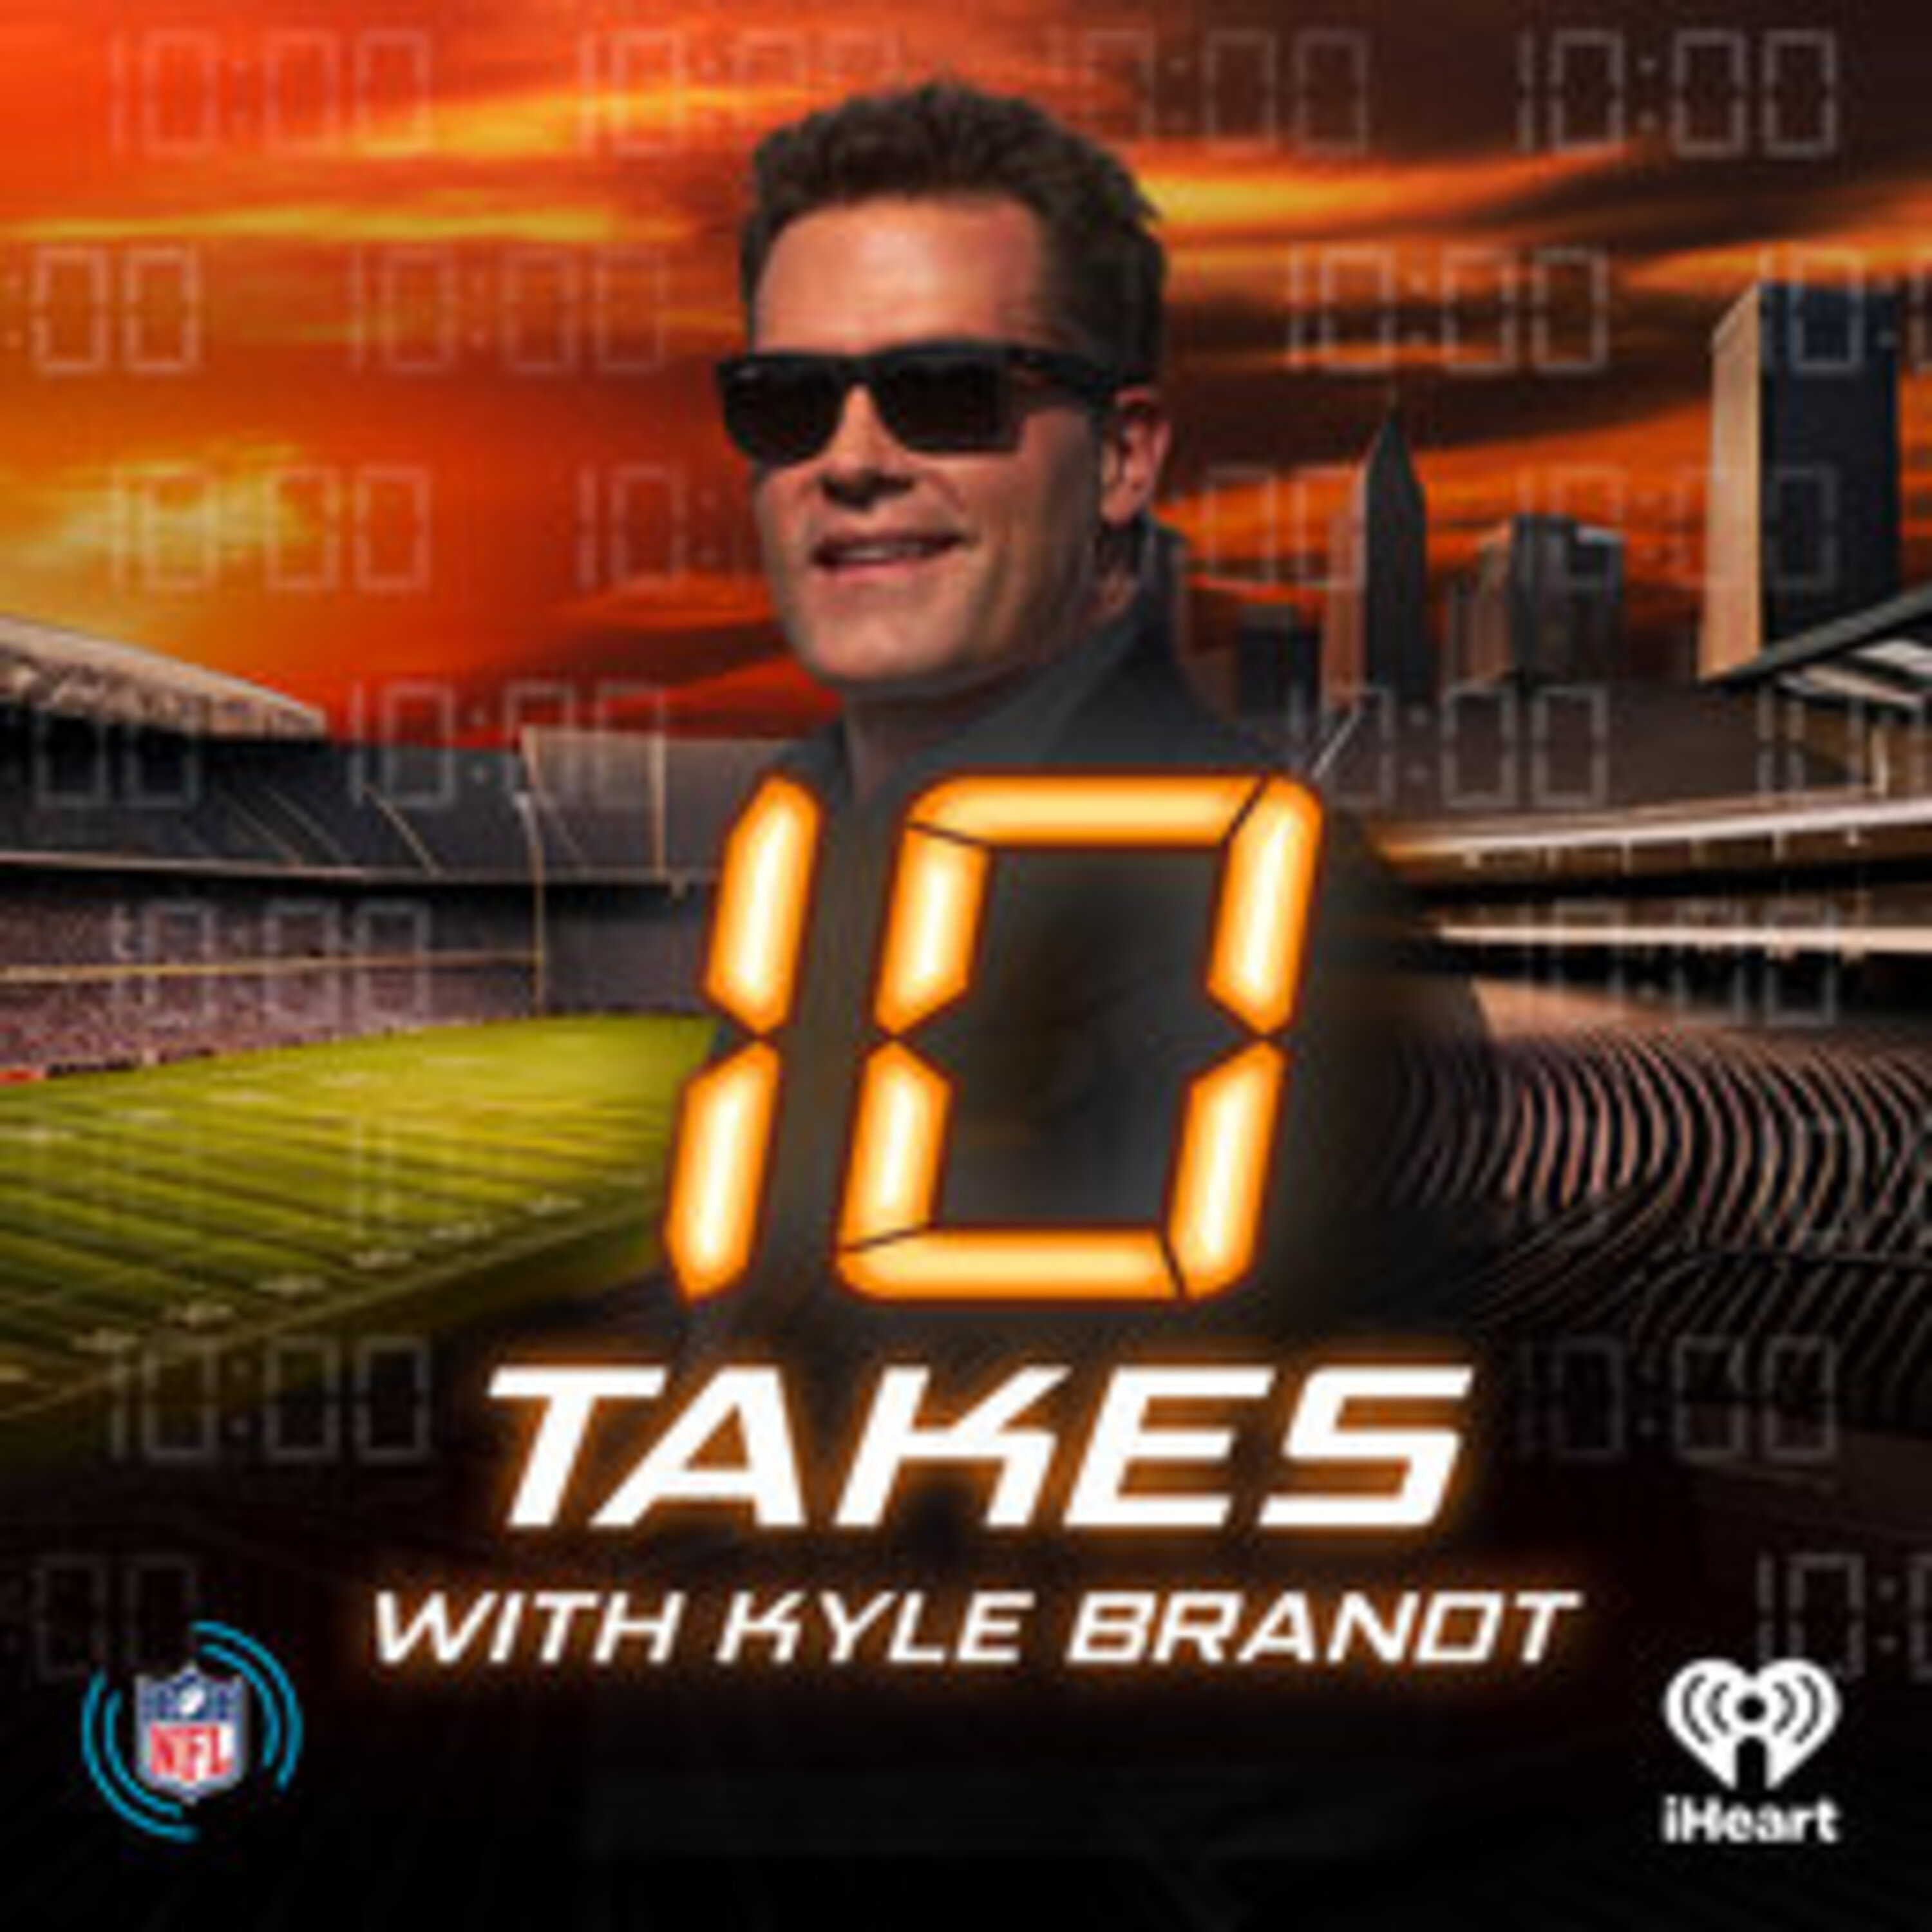 10 Takes with Kyle Brandt:  Like CFB, we're leaving top teams out